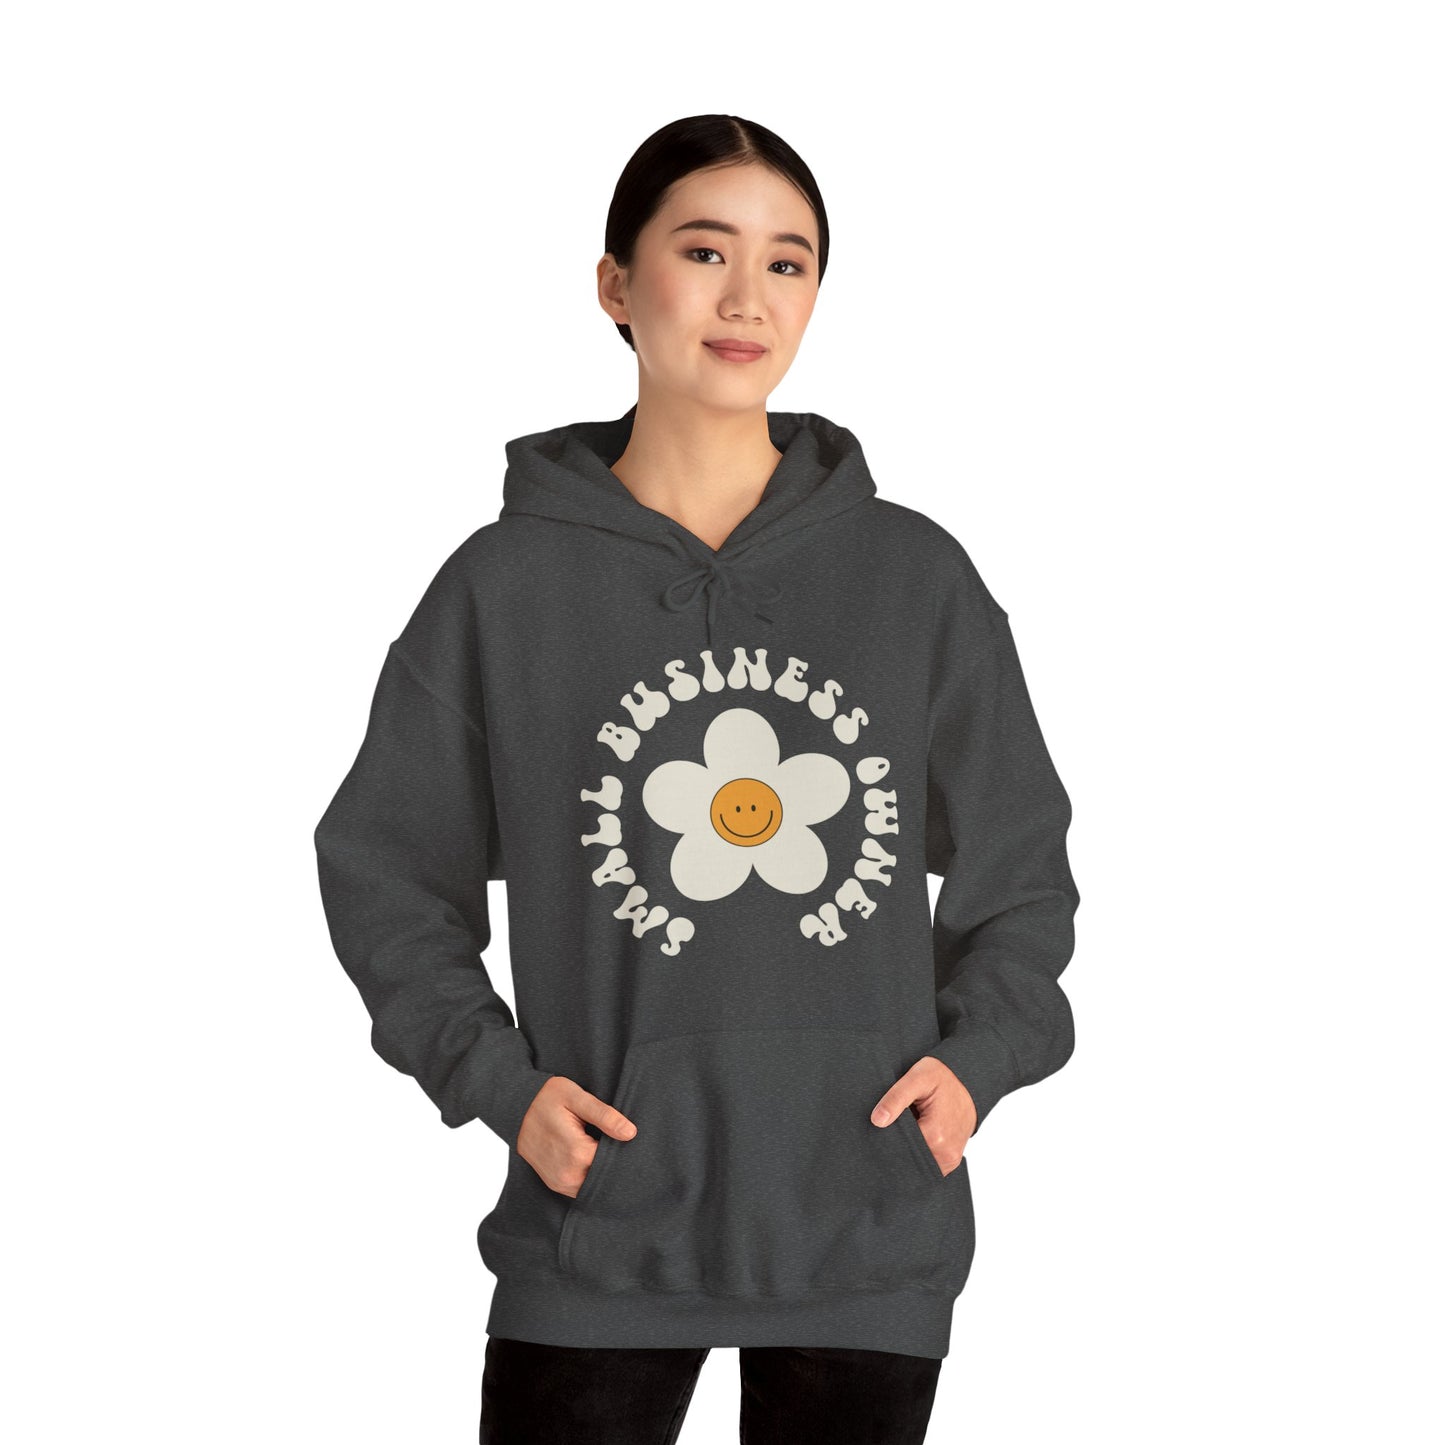 Small Business Owner Hooded Sweatshirt